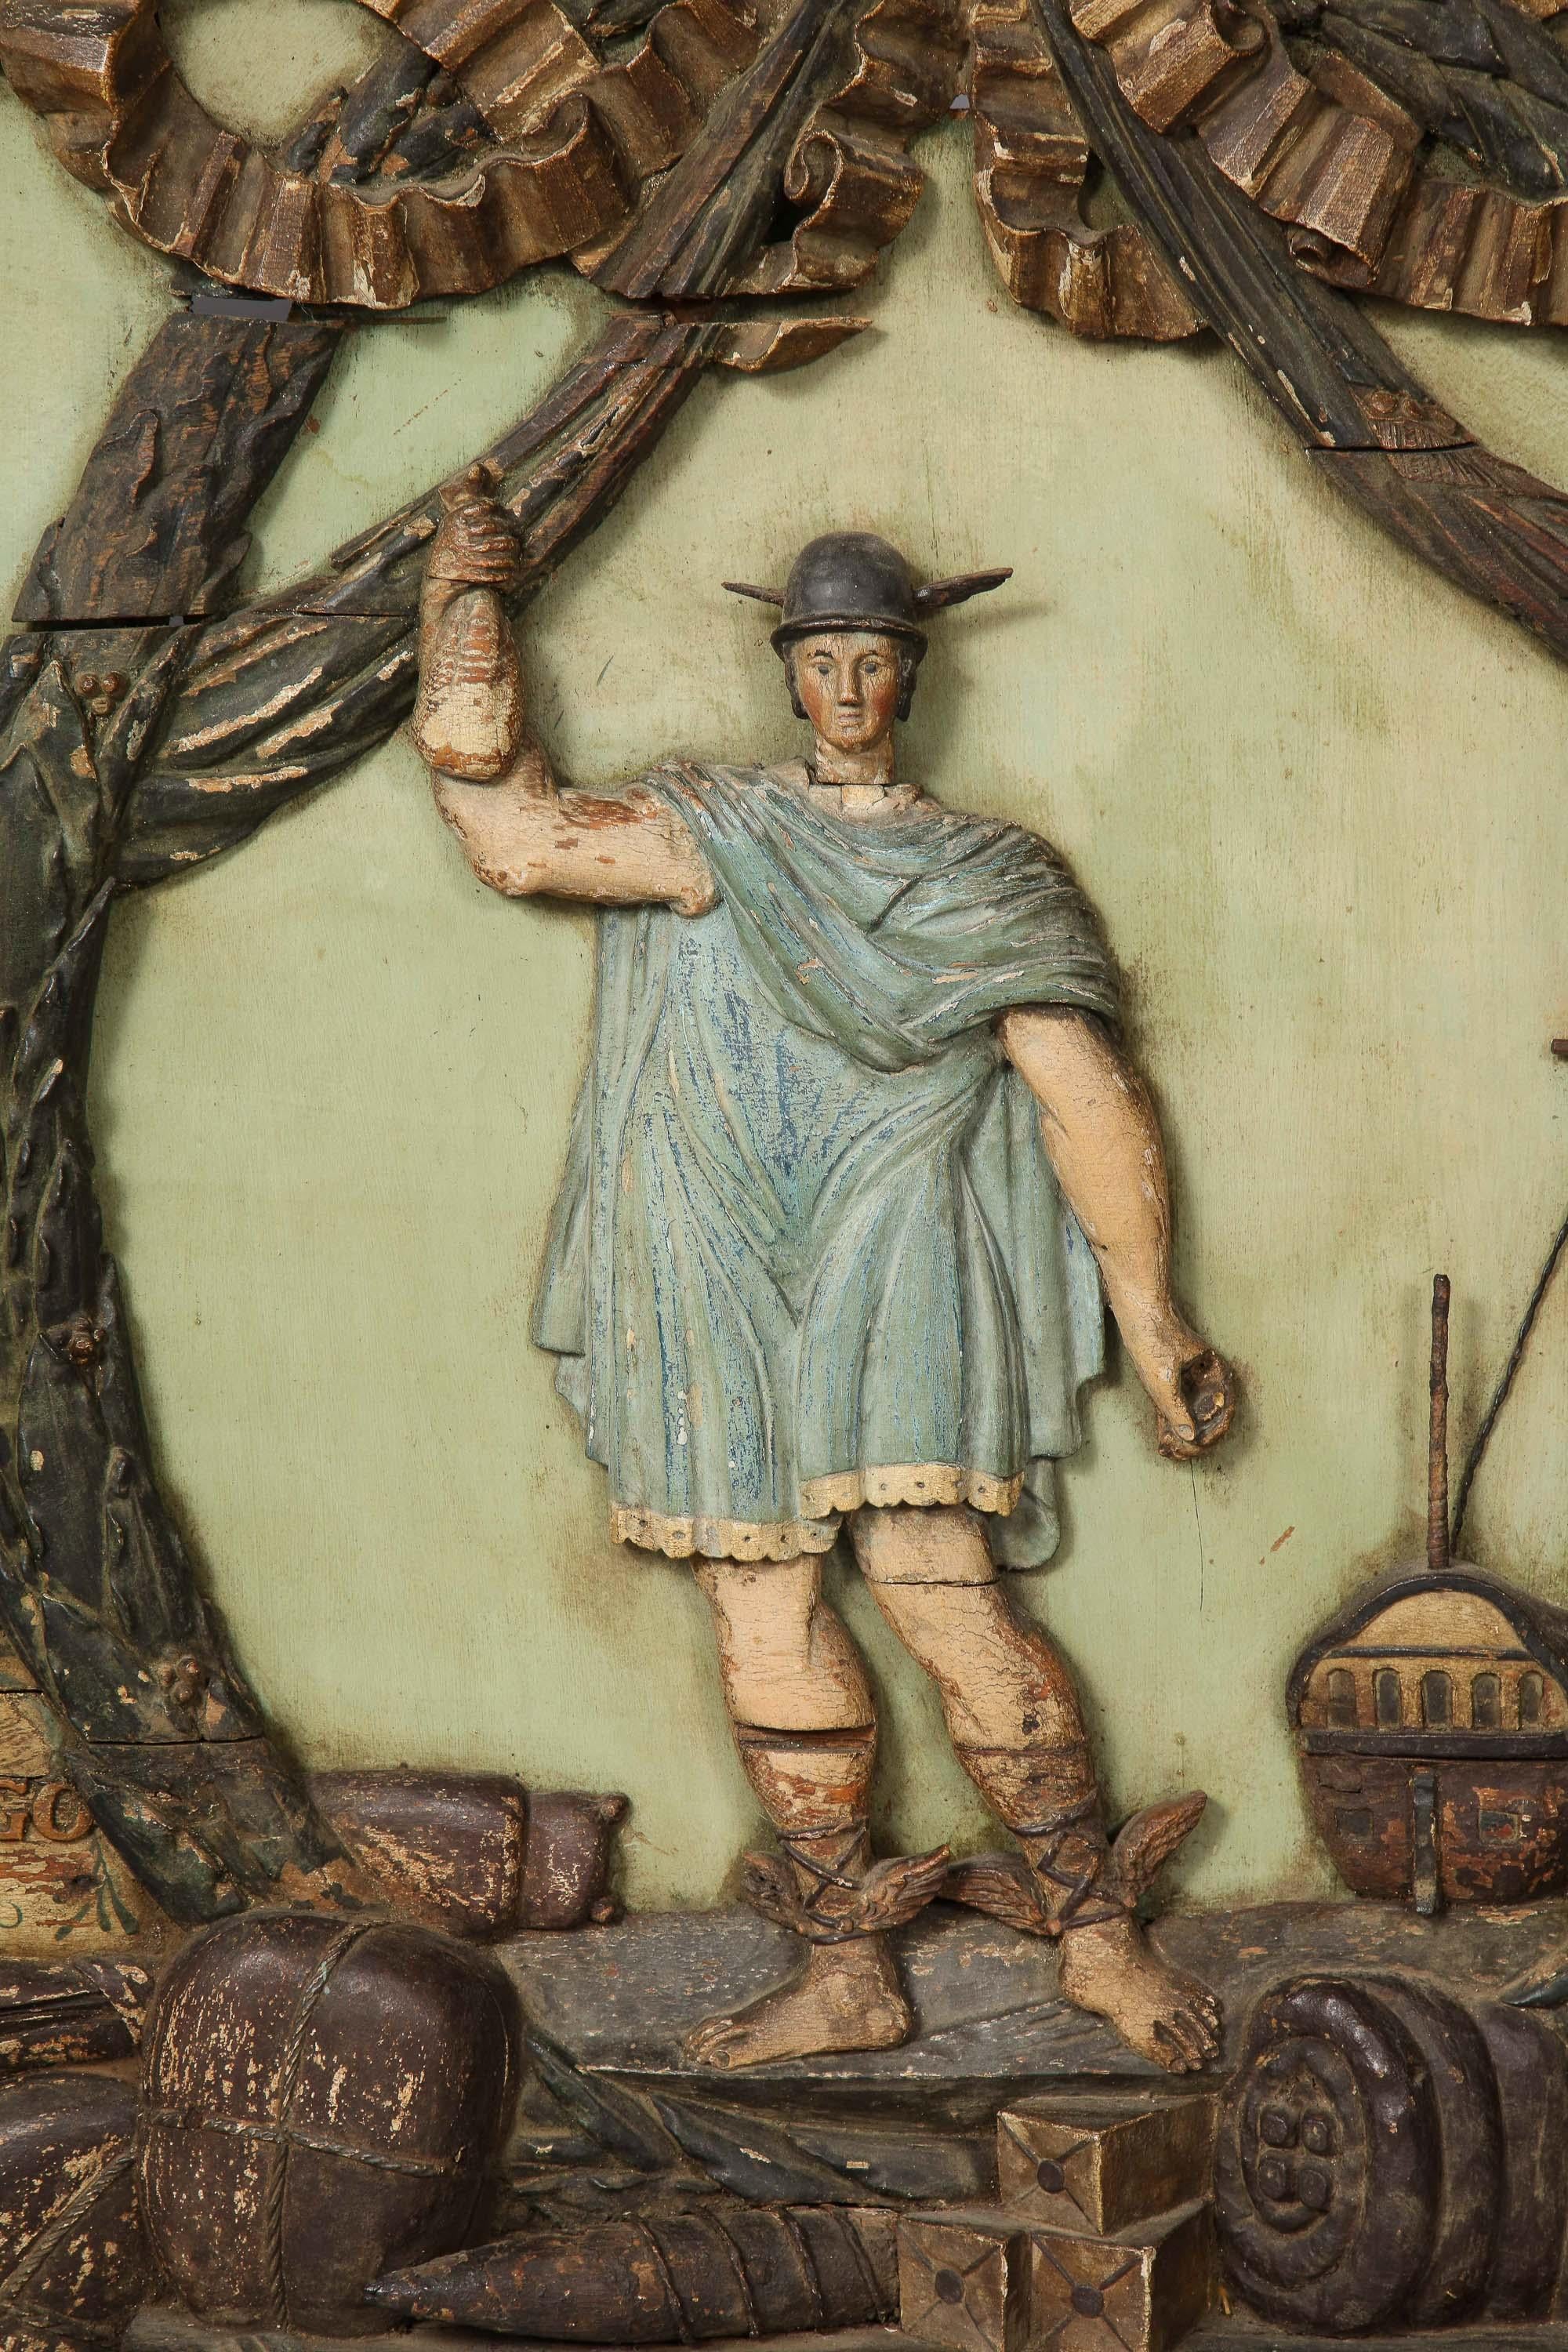 An 18th century trade sign from a Dutch West Indies shipping merchant. The carved and polychromed sign depicts a winged-foot mercury surrounded by garlands with his ship and the wares of tobacco merchant at his feet. This trade sign would function